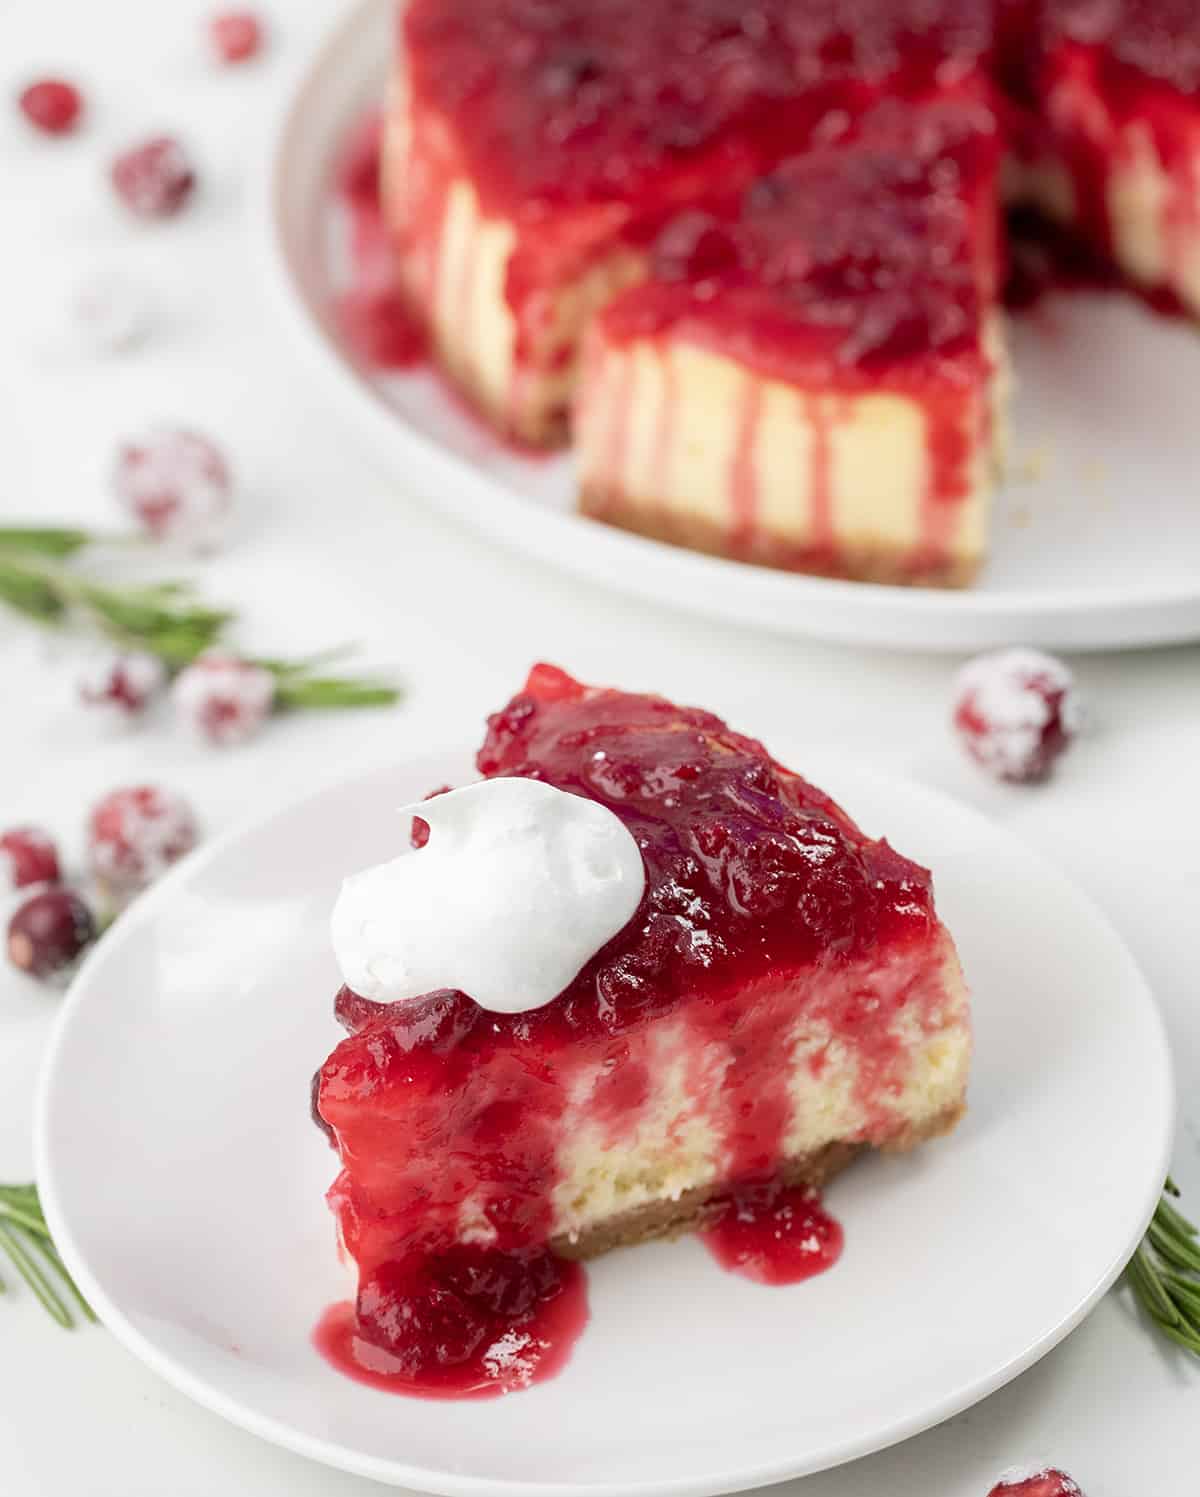 Slice of Cranberry Cheesecake on a white plate next to the cheesecake on a white counter.